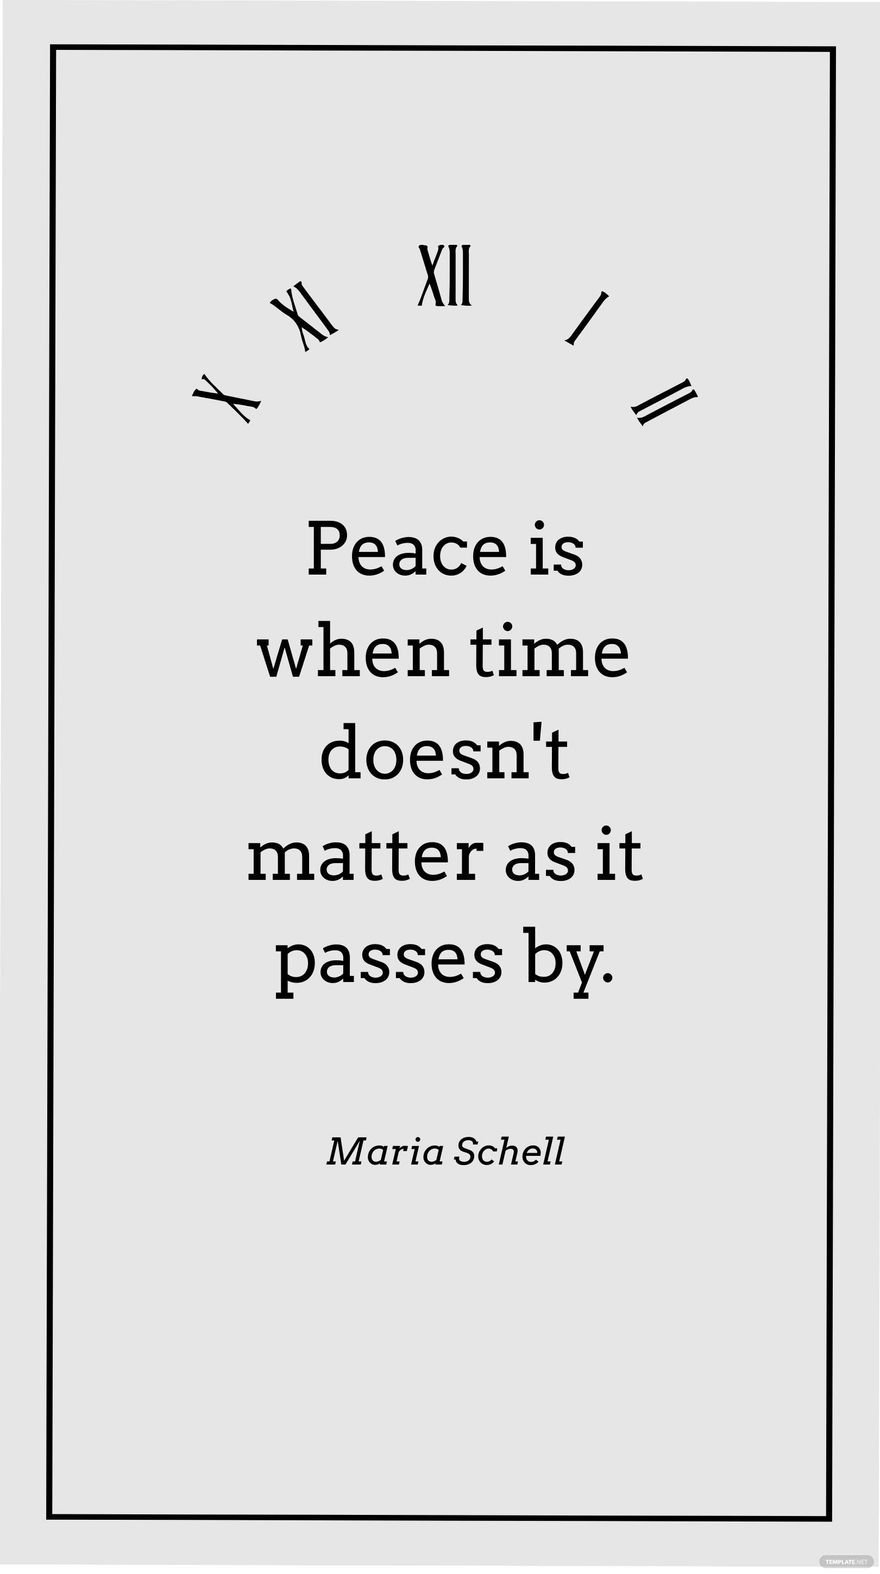 Maria Schell - Peace is when time doesn't matter as it passes by. in JPG